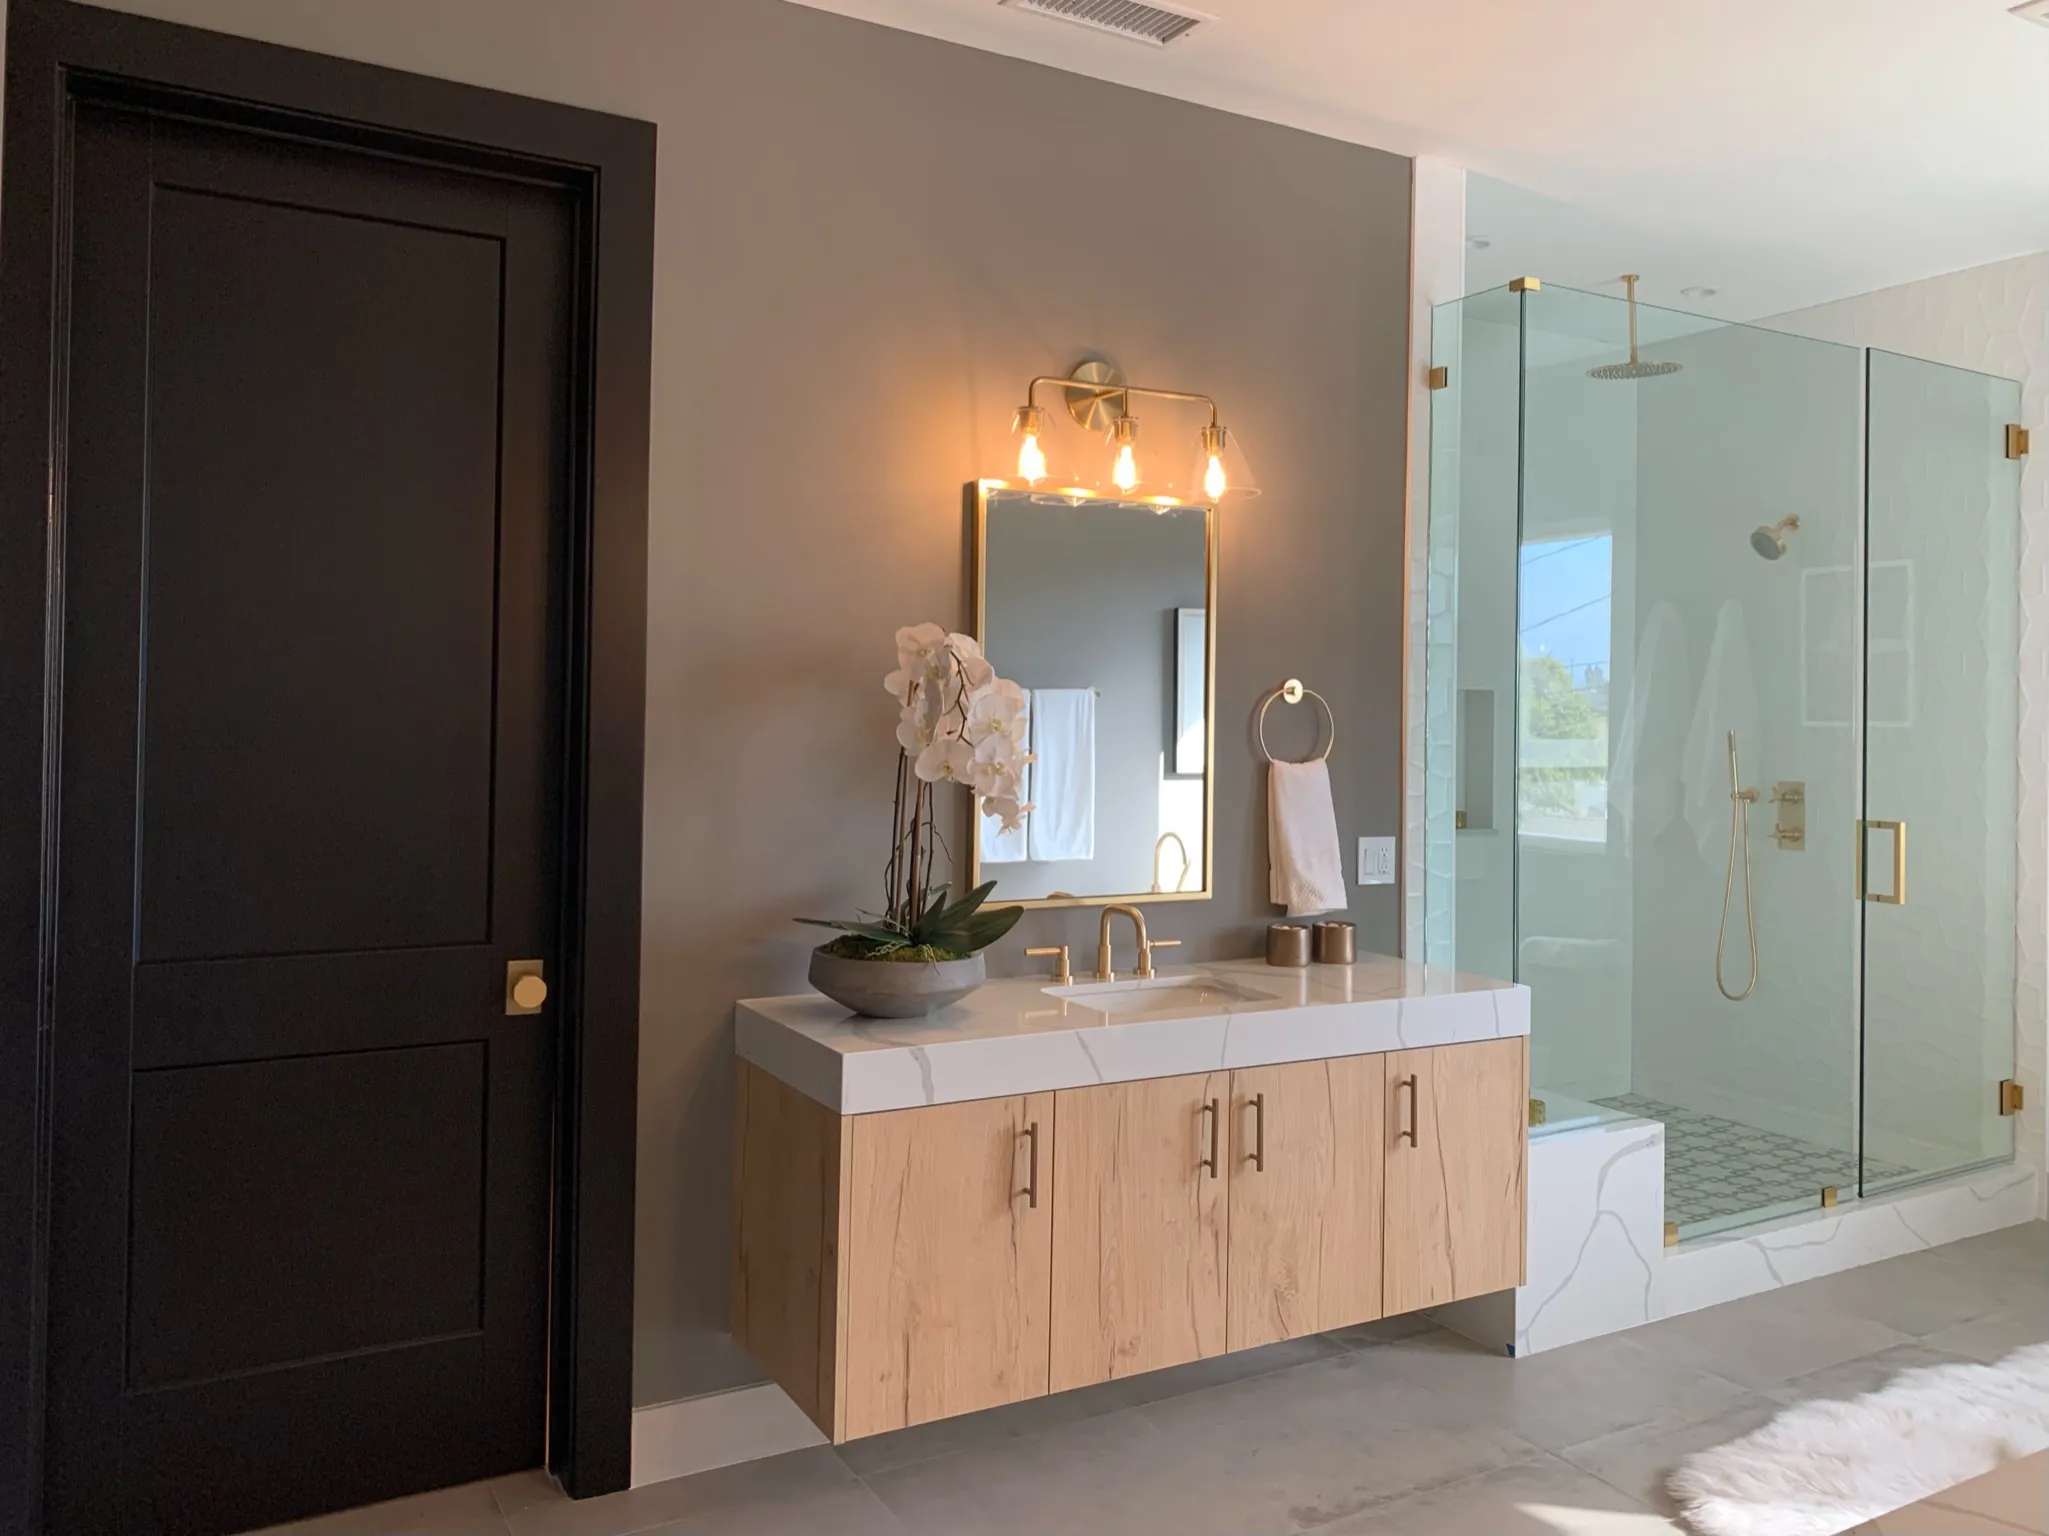 By using minimalist fixtures, you help open up the bathroom, creating a perception of more space.